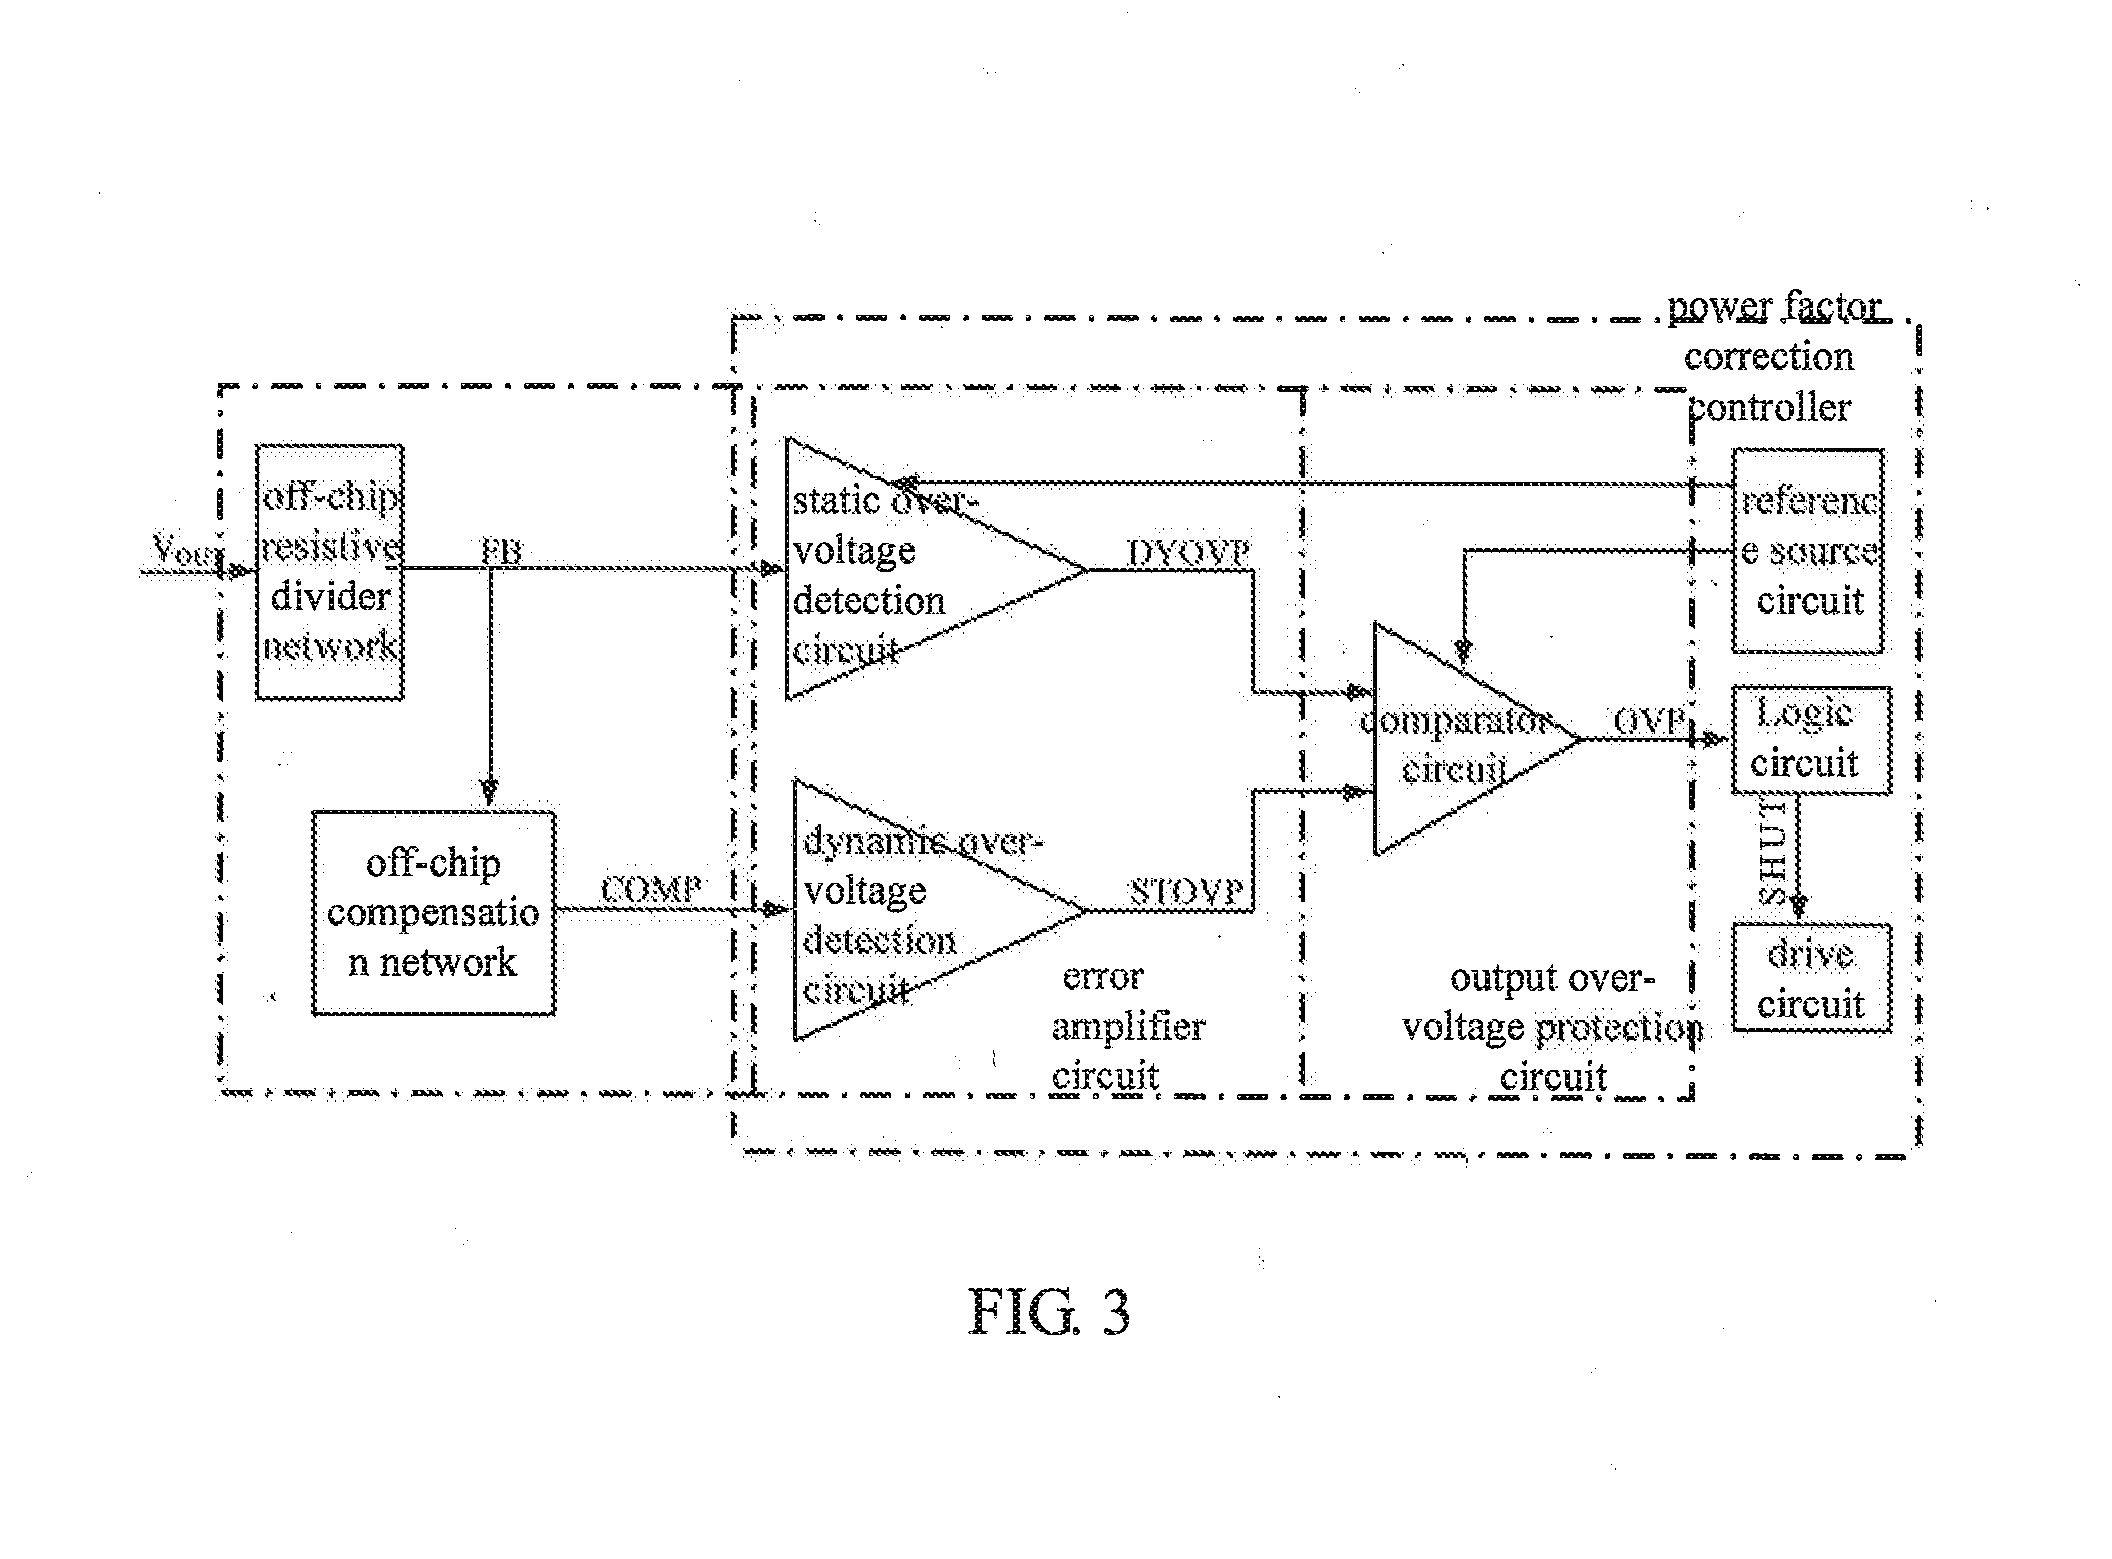 Output over-voltage protection circuit for power factor correction